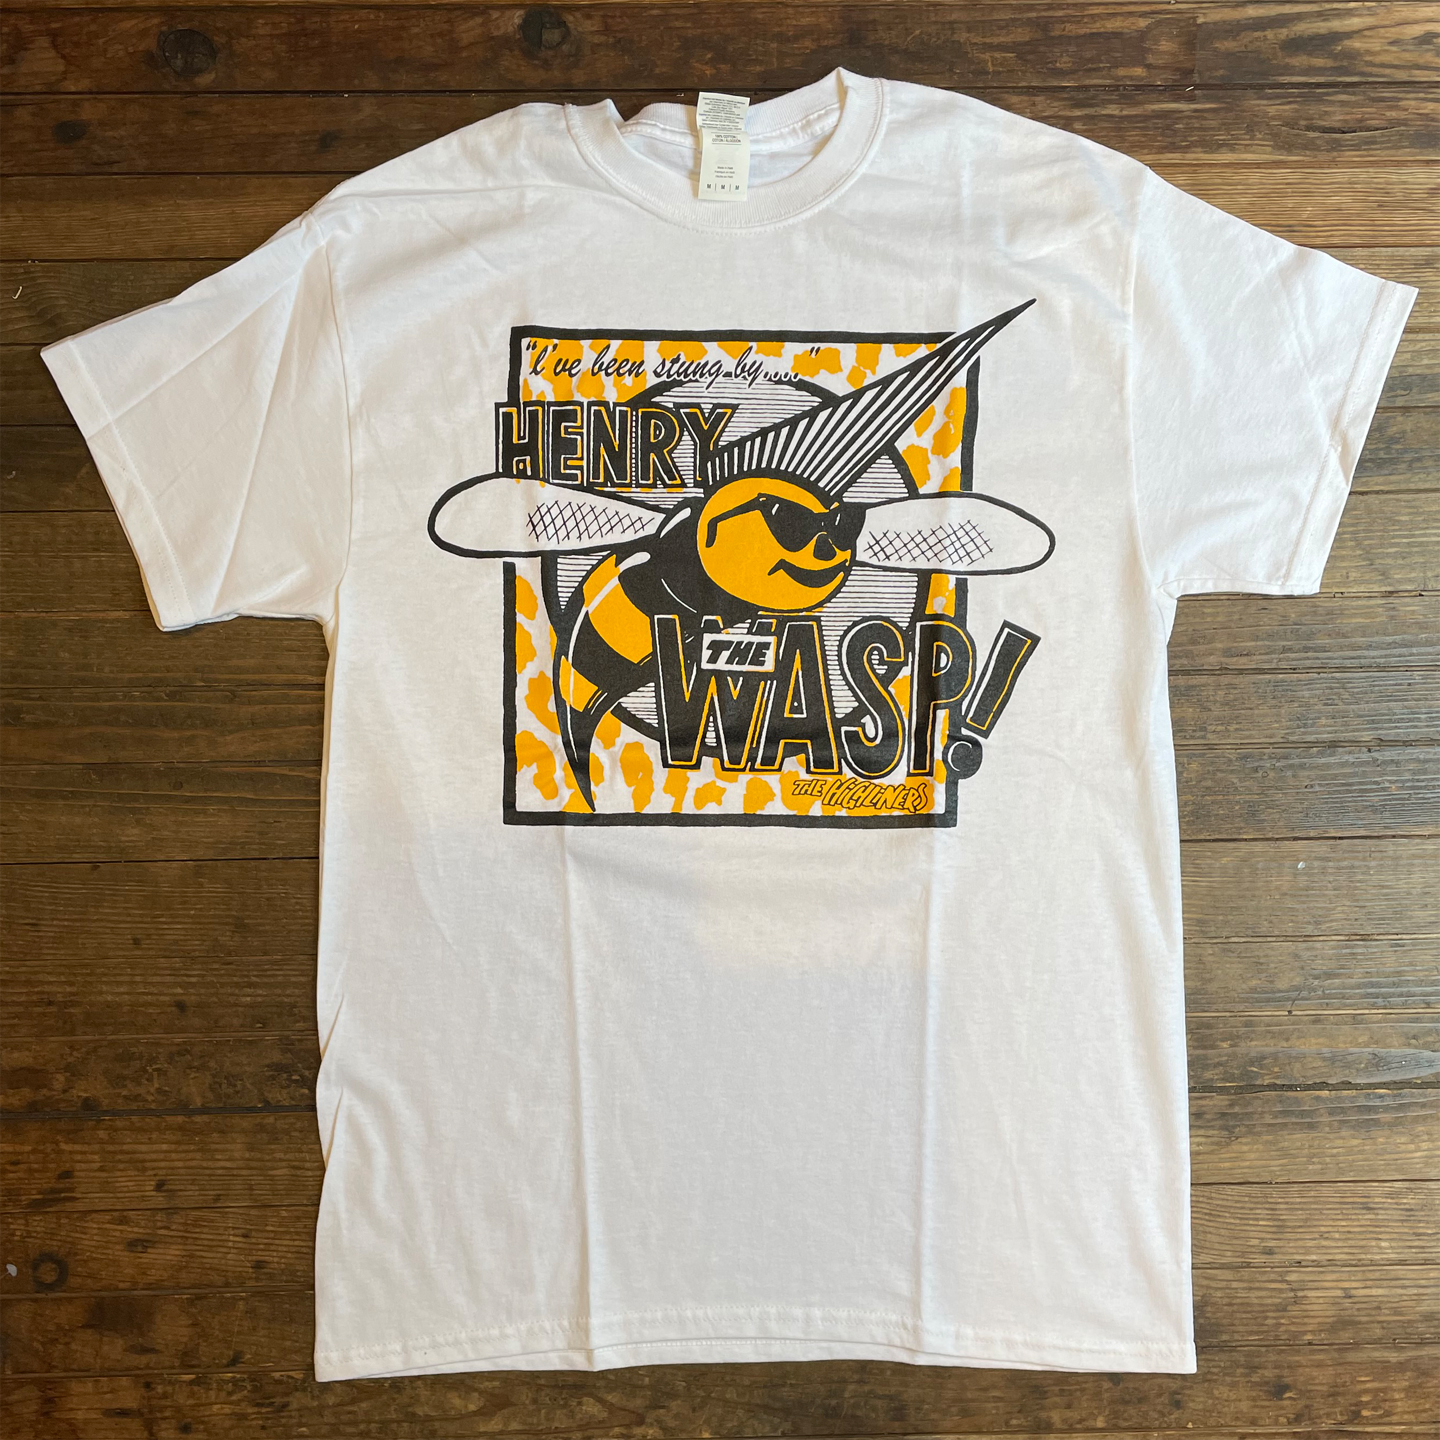 THE HIGHLINERS Tシャツ HENRY THE WASP